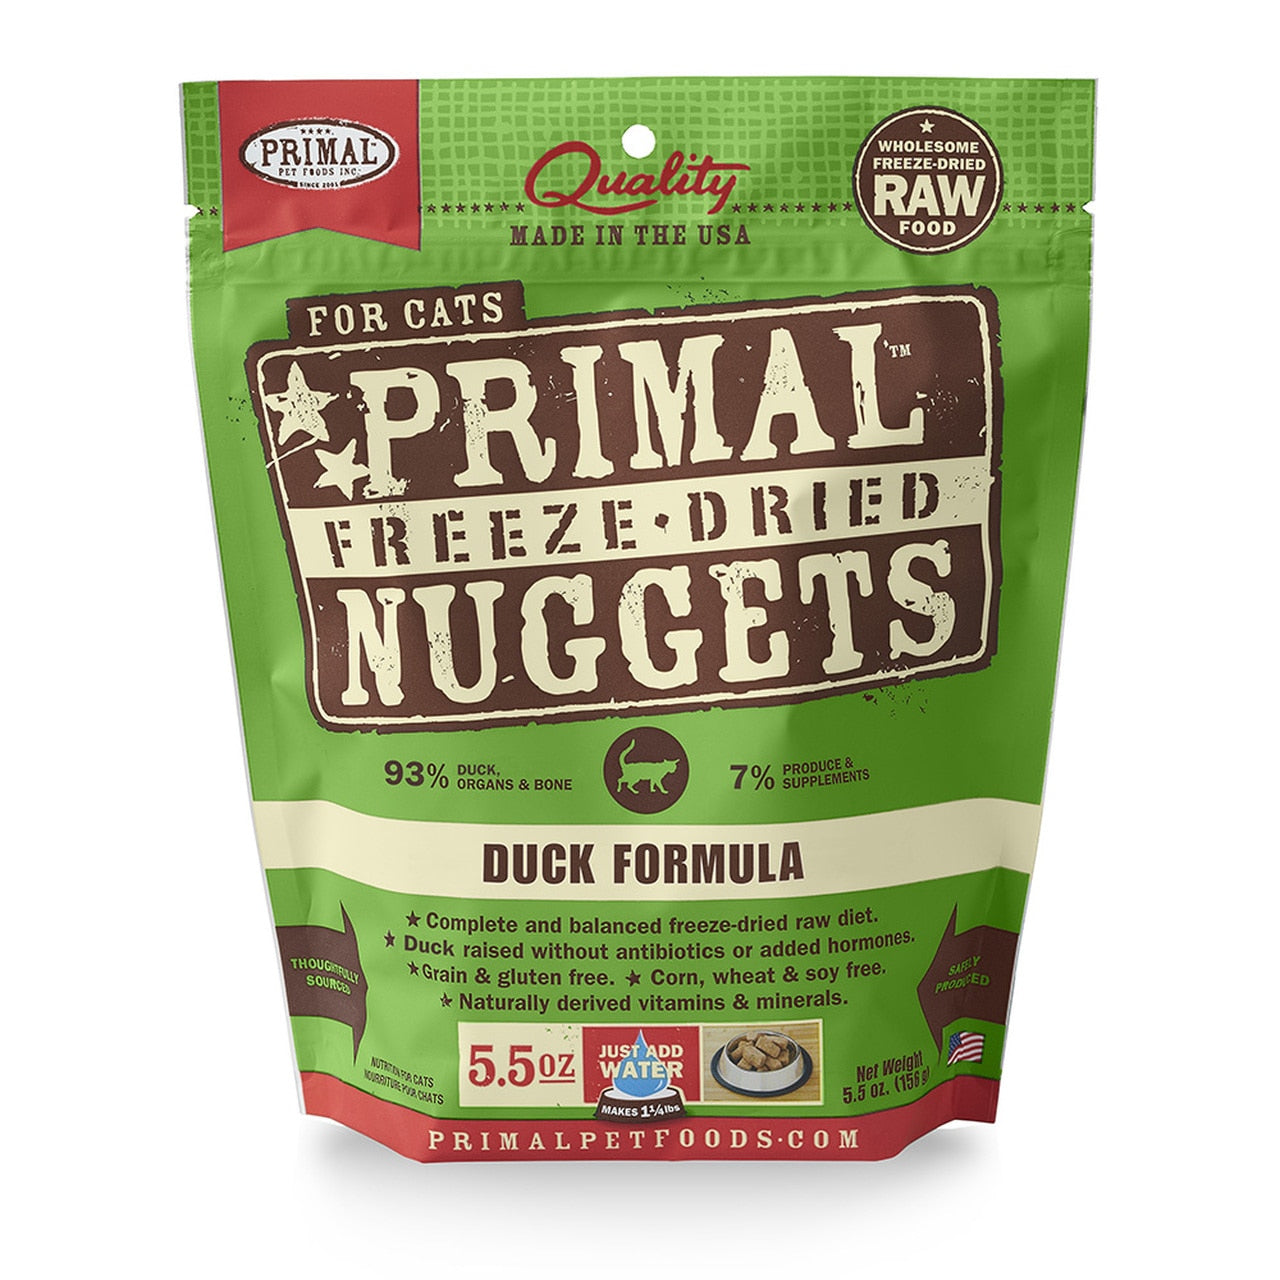 Primal - Freeze Dried Nuggets - Duck Formula (Cat Food)